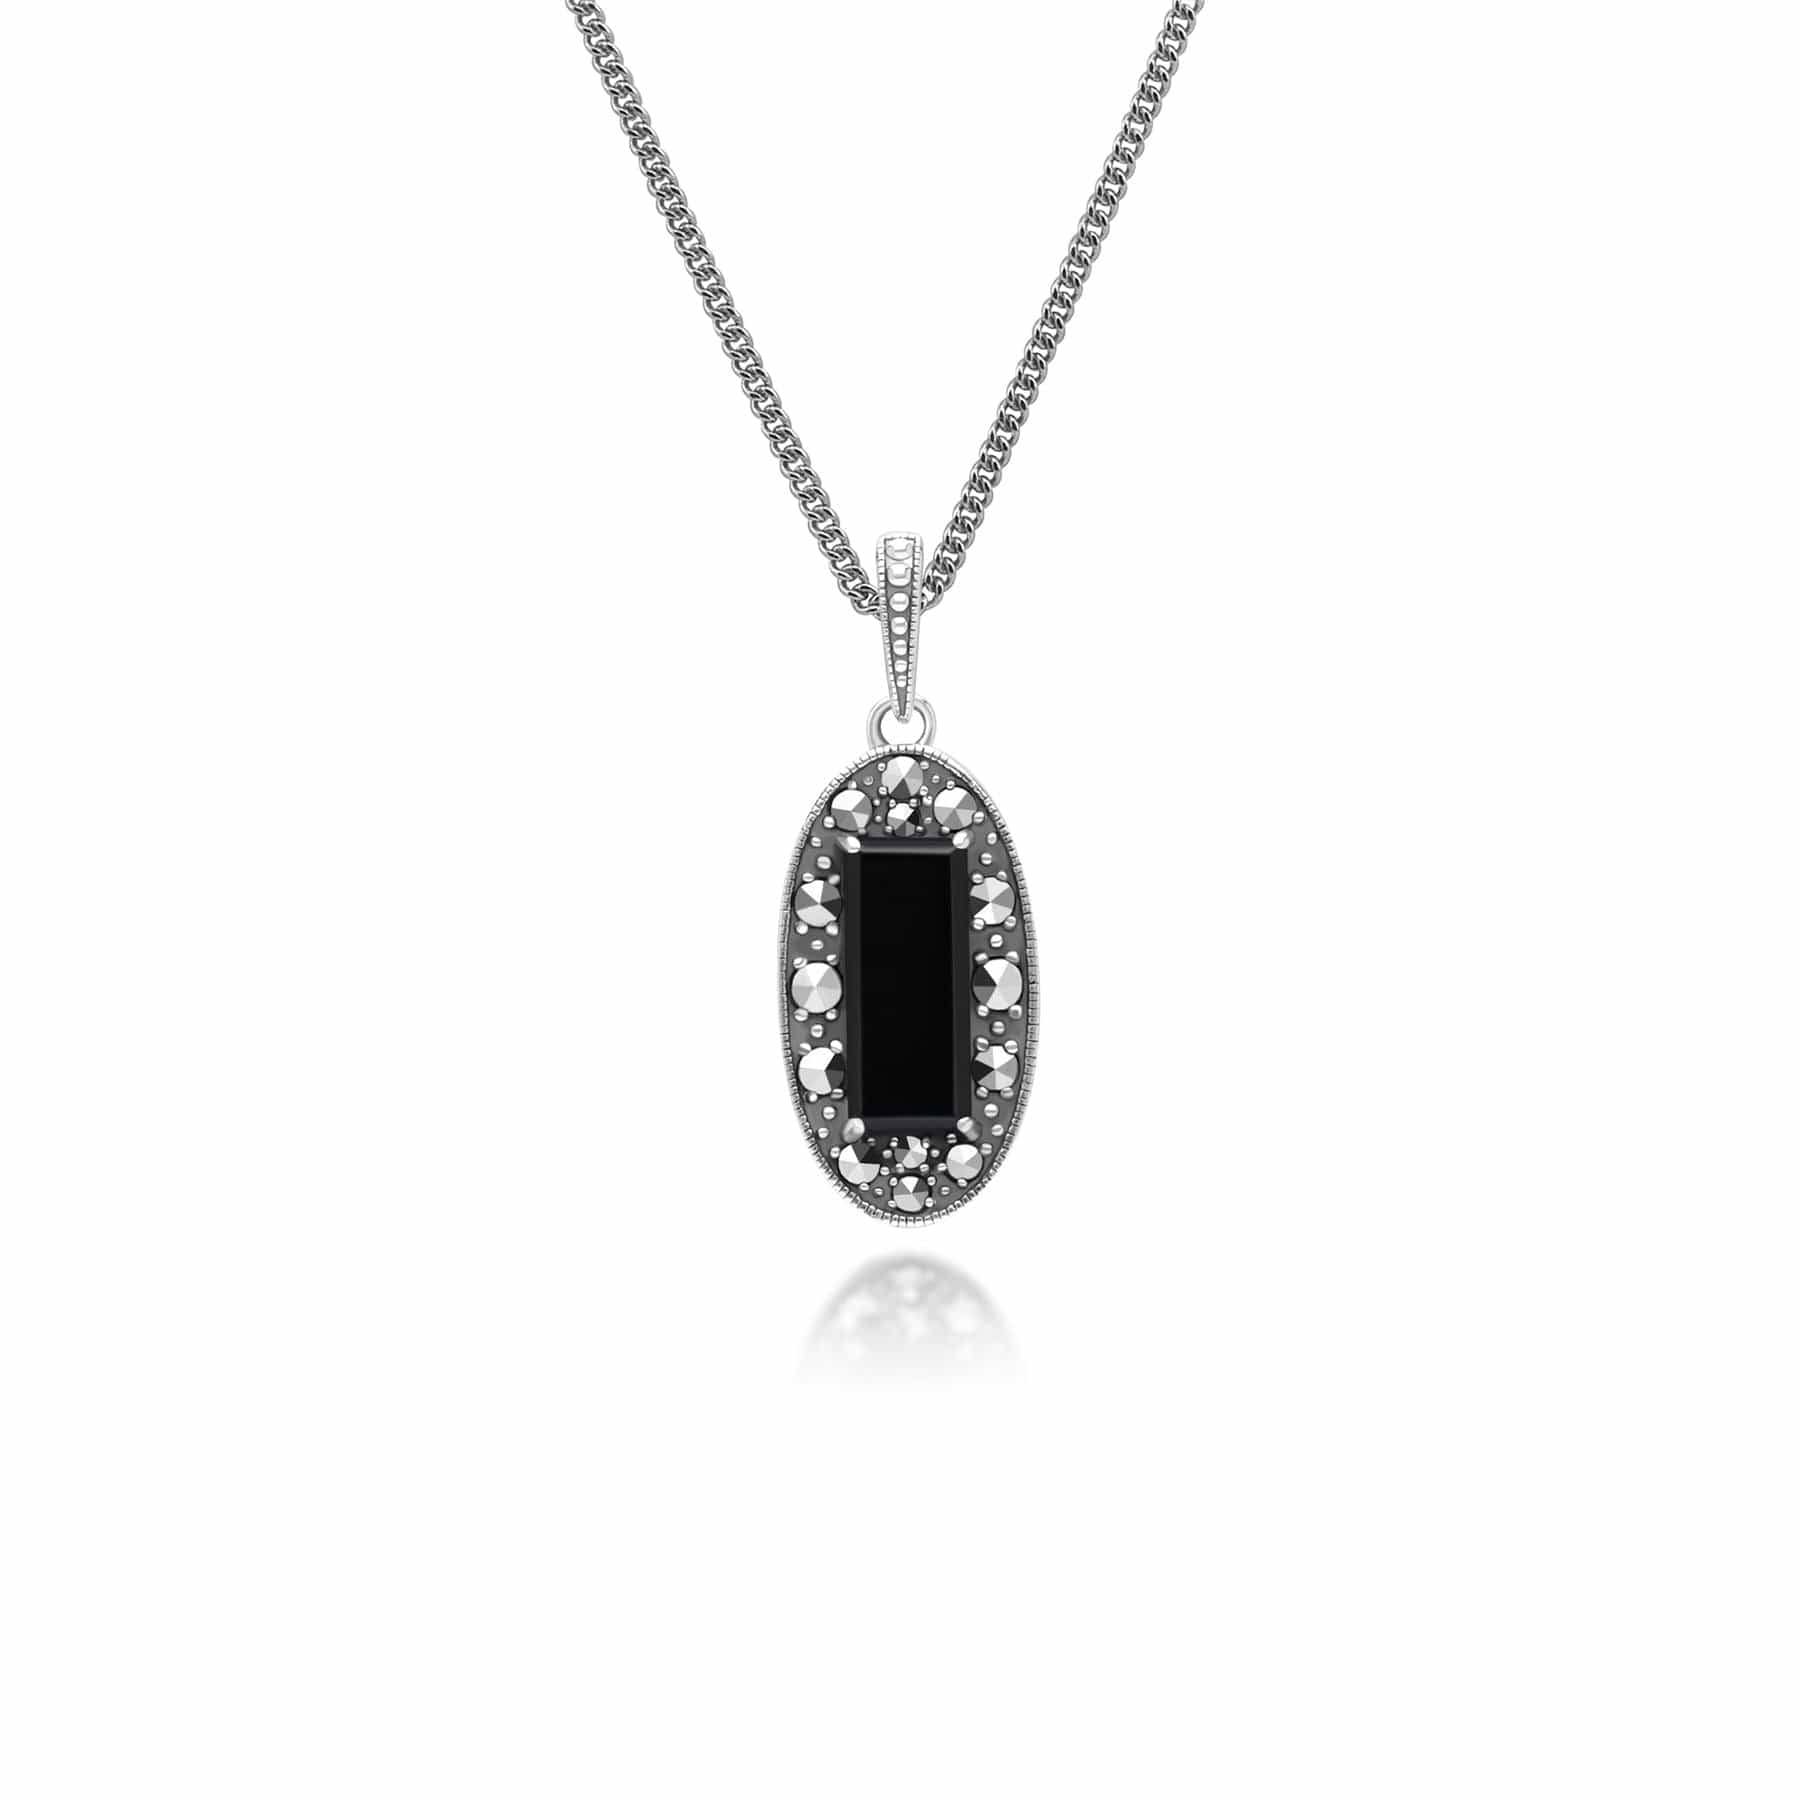 Art Deco Style Oval Onyx and Marcasite Pendant Necklace in Sterling Silver 214P334302925 